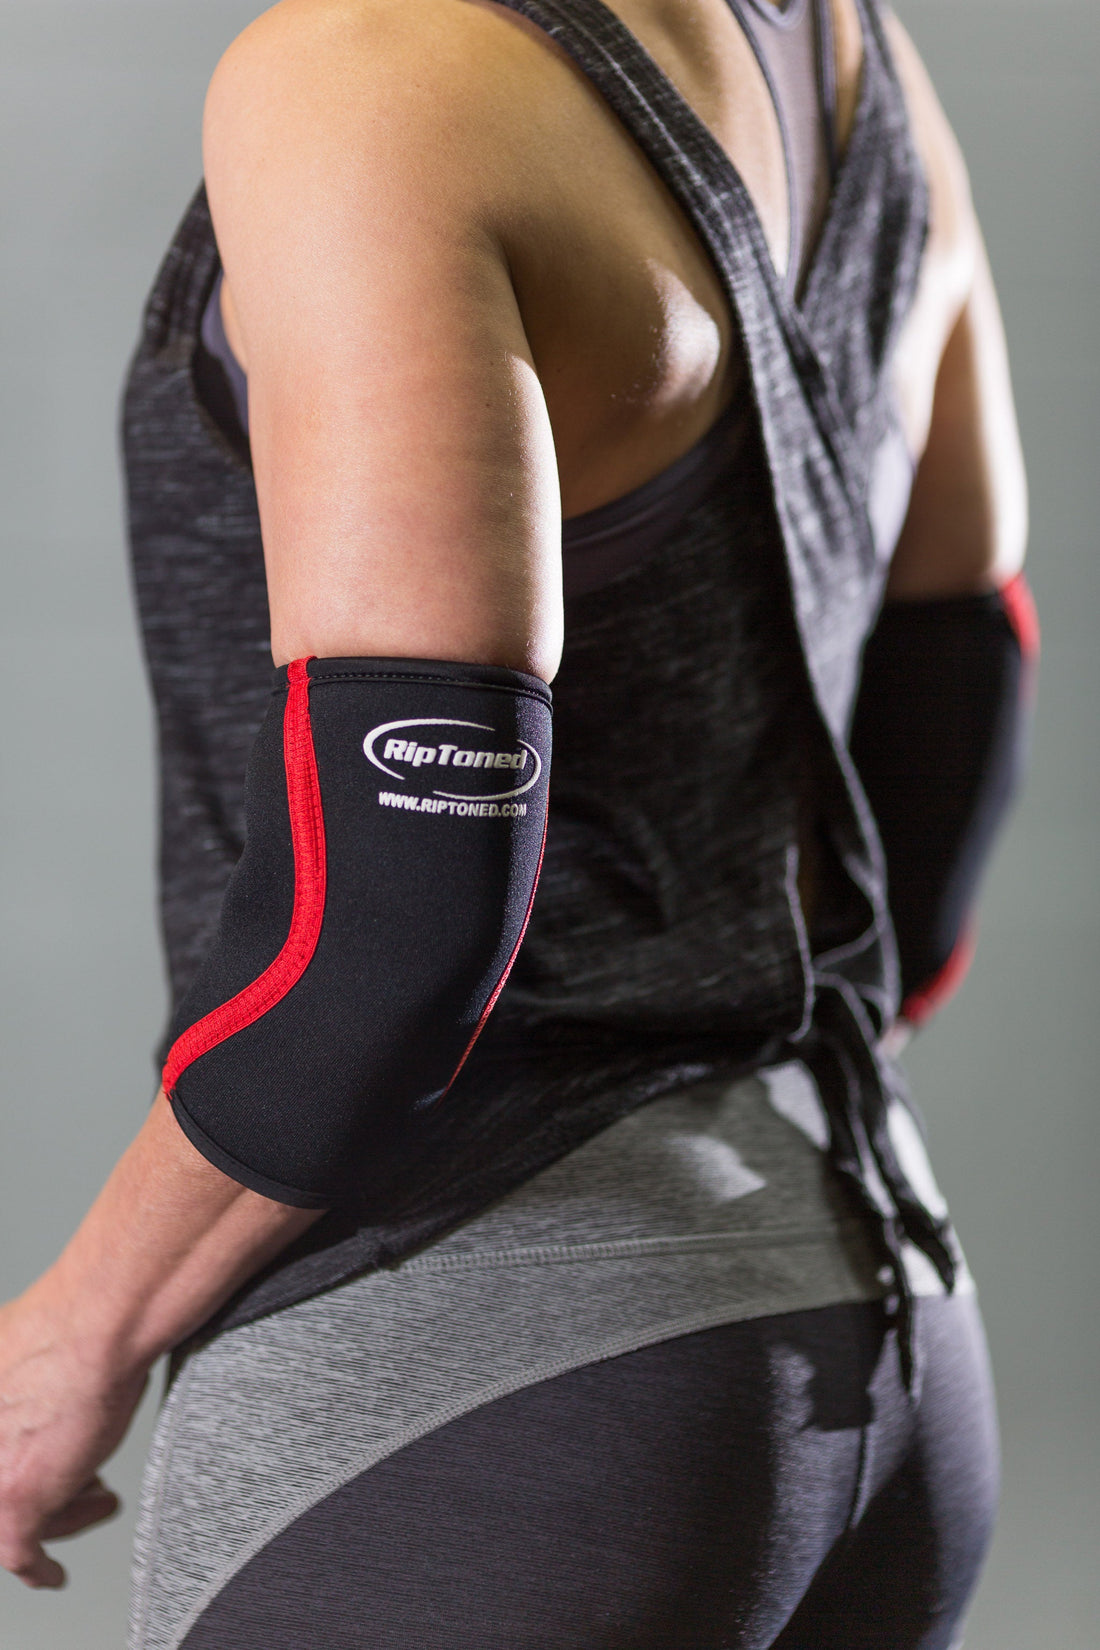 Unleash Your Power: All You Need to Know About Weightlifting Elbow Sleeves - Rip Toned